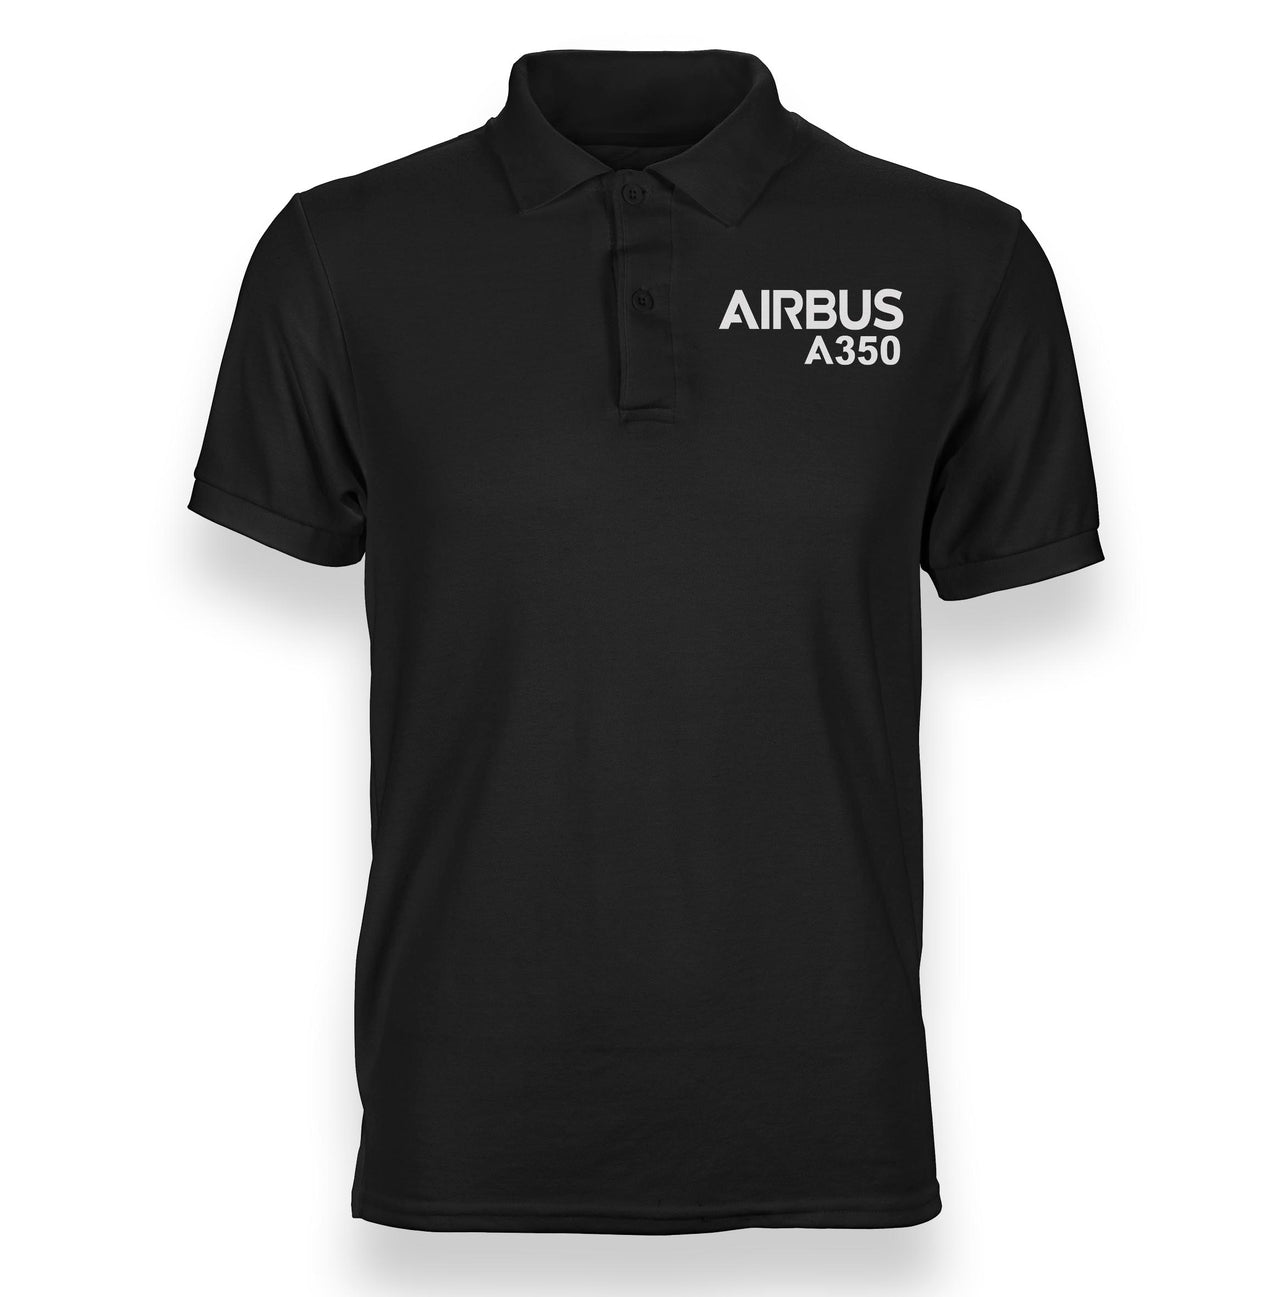 Airbus A350 & Text Designed Polo T-Shirts